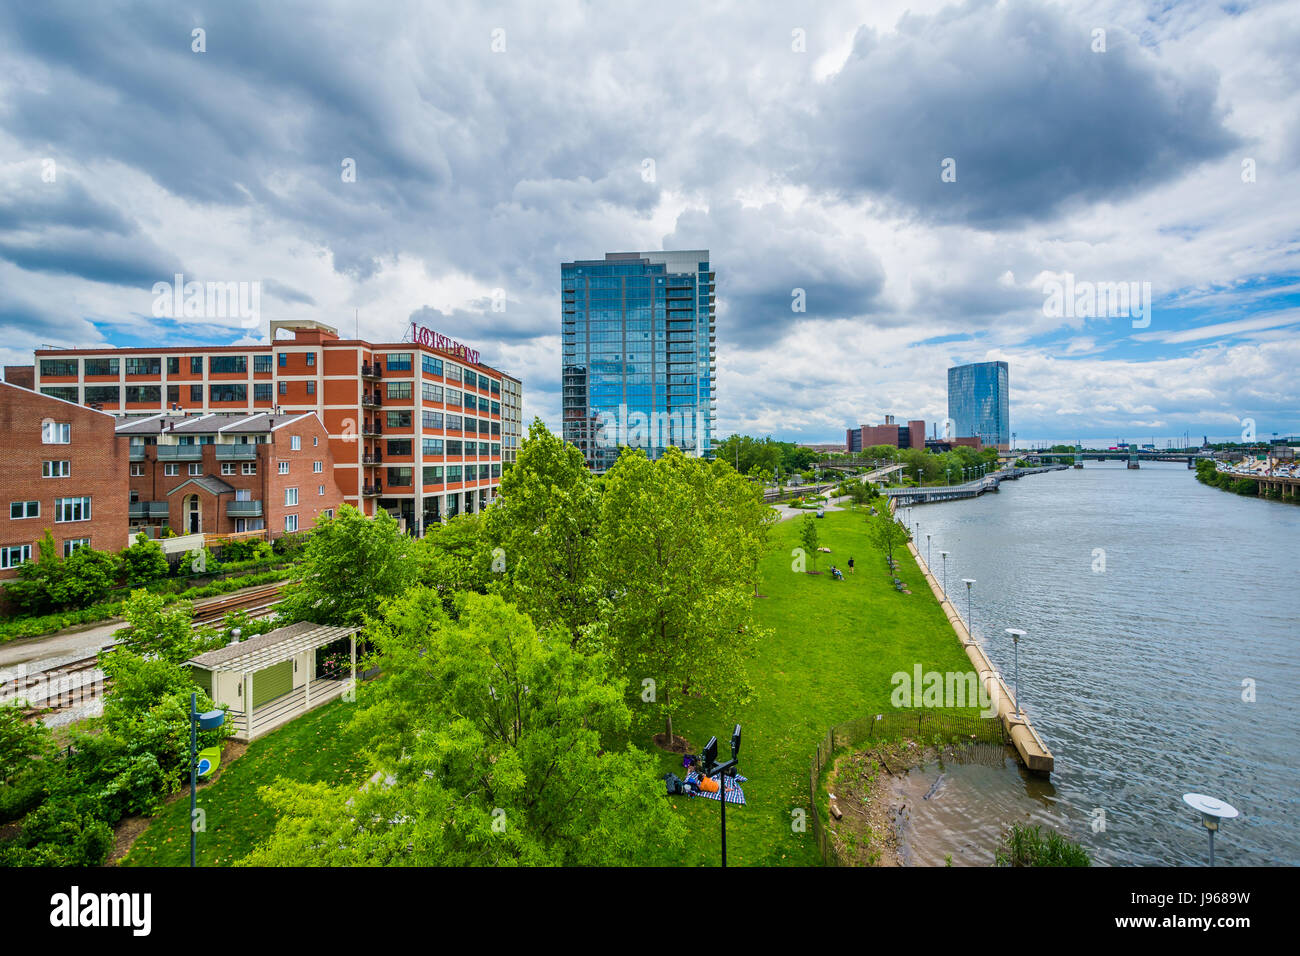 View of a park and buildings along the Schuylkill River in Philadelphia, Pennsylvania. Stock Photo